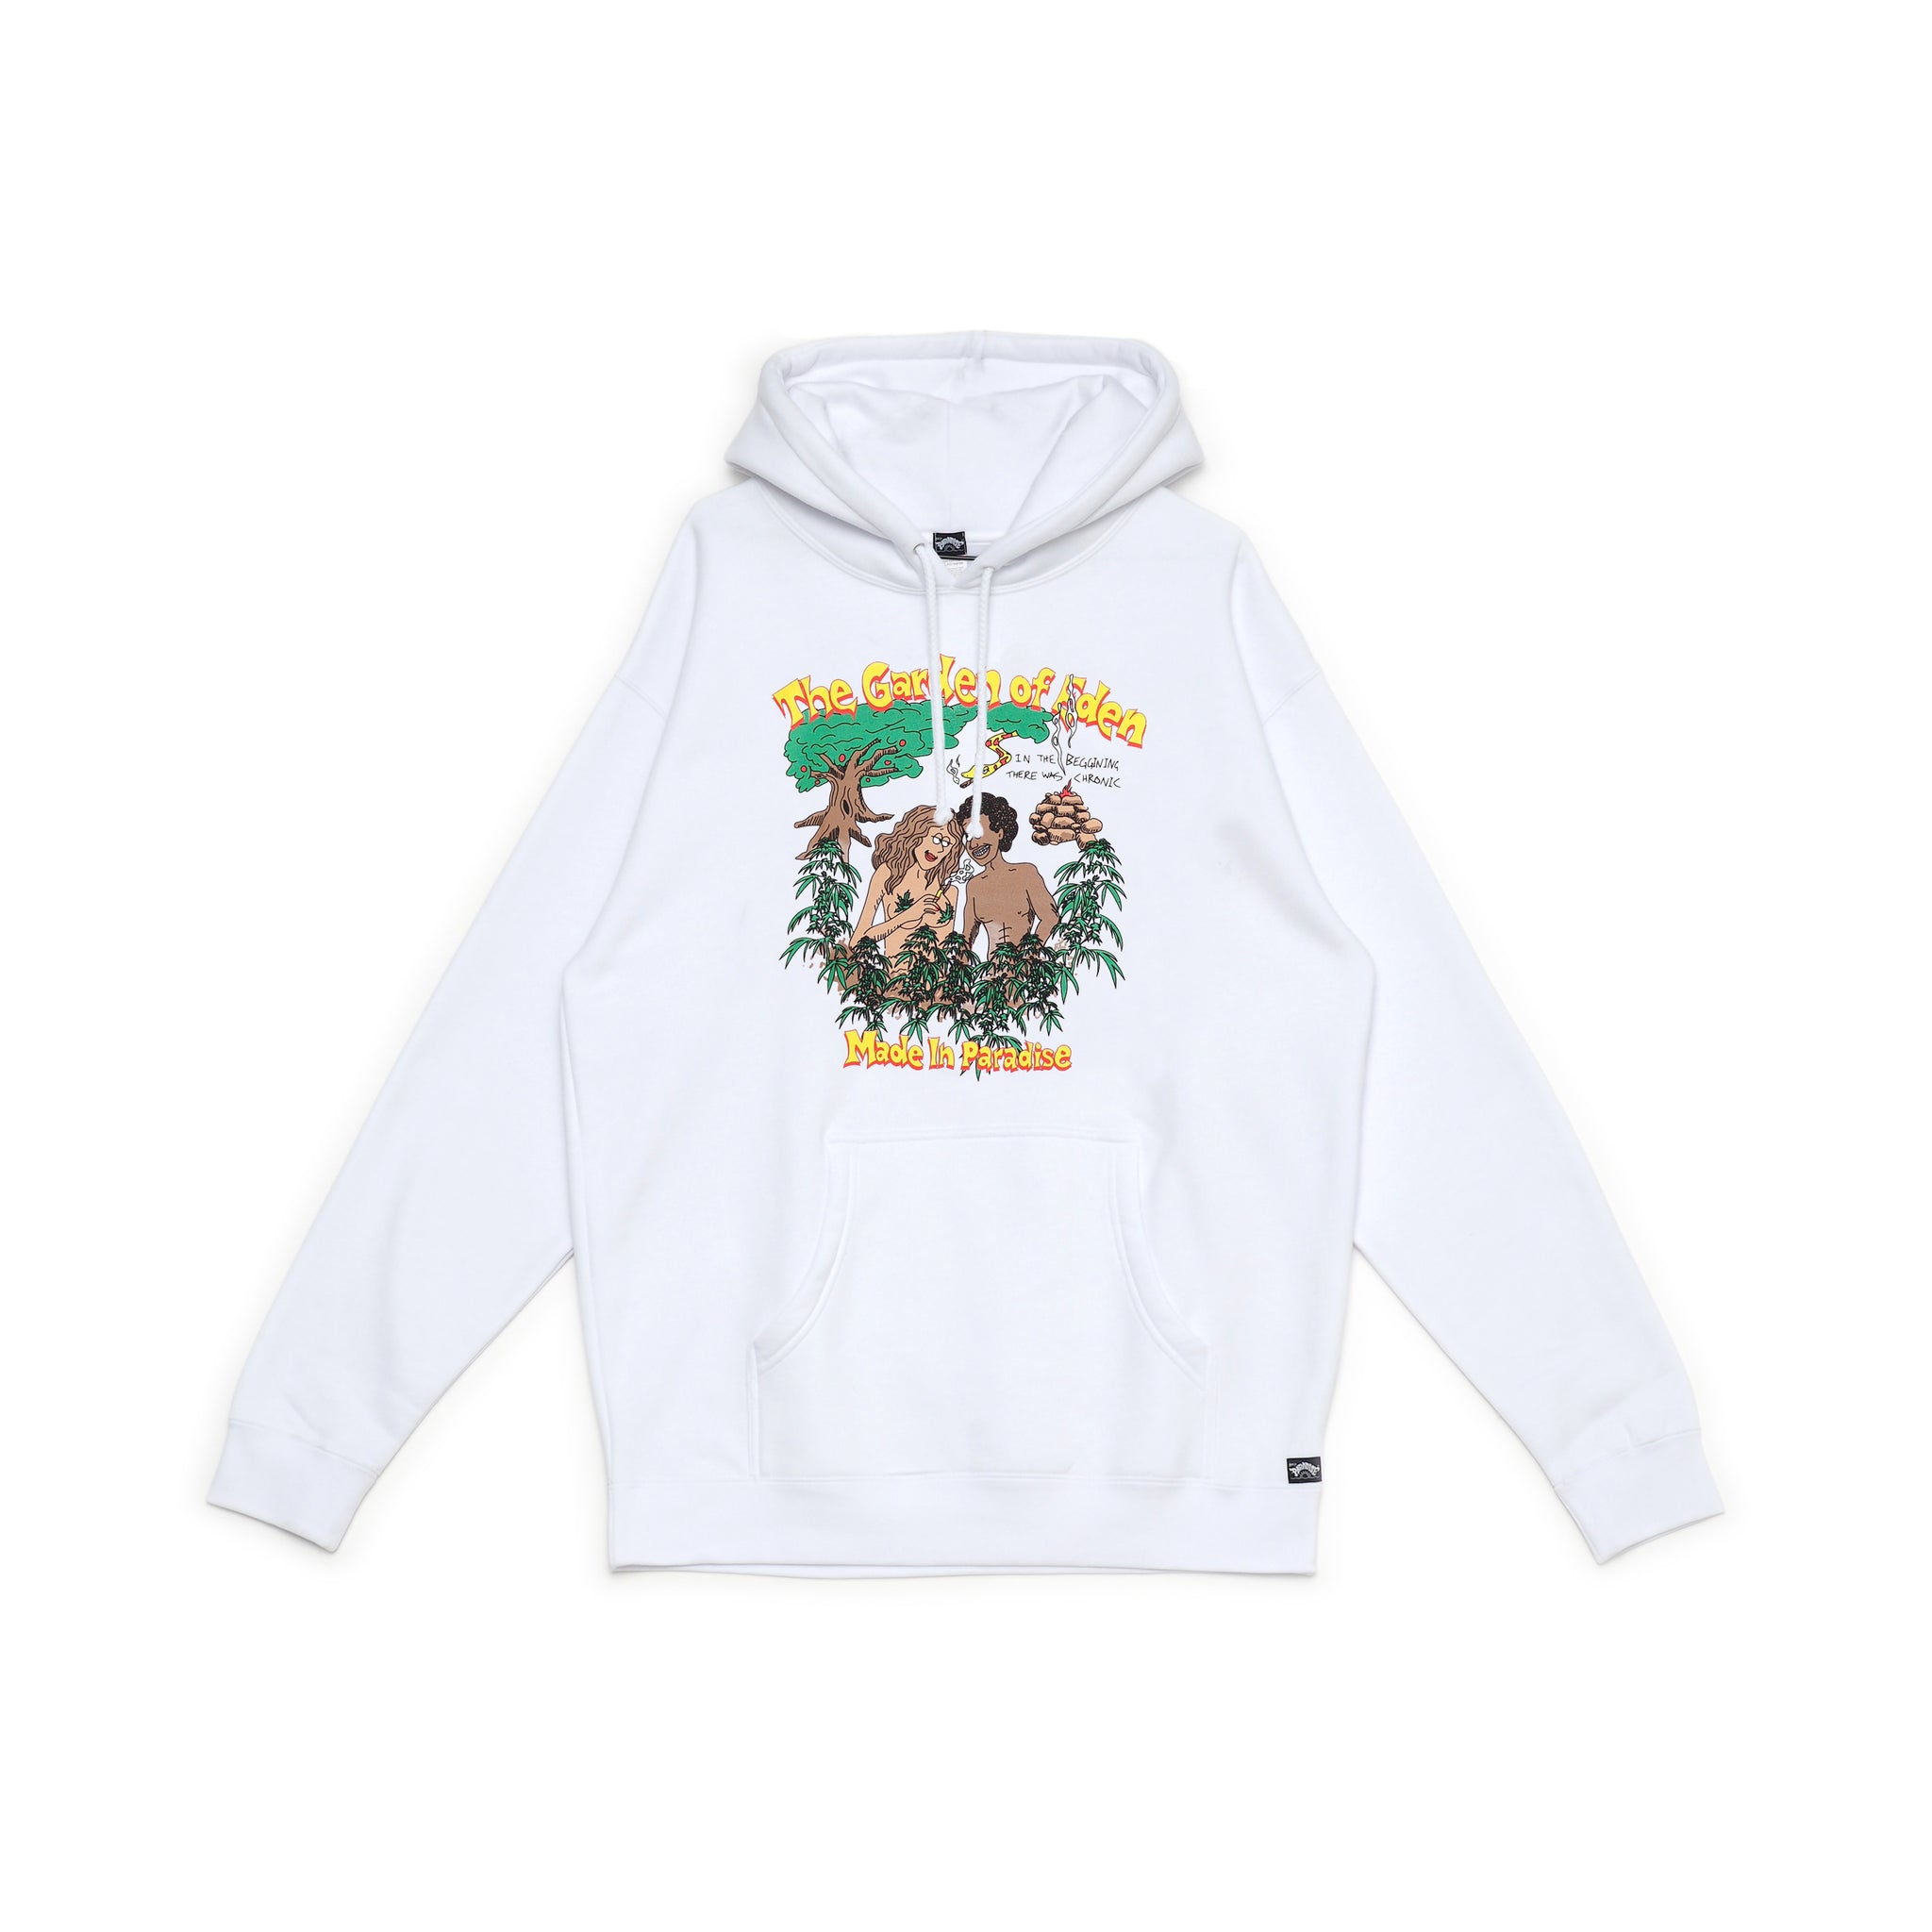 Front view of Made in Paradise Homegrown Collection "GARDEN OF EDEN" white hoodie